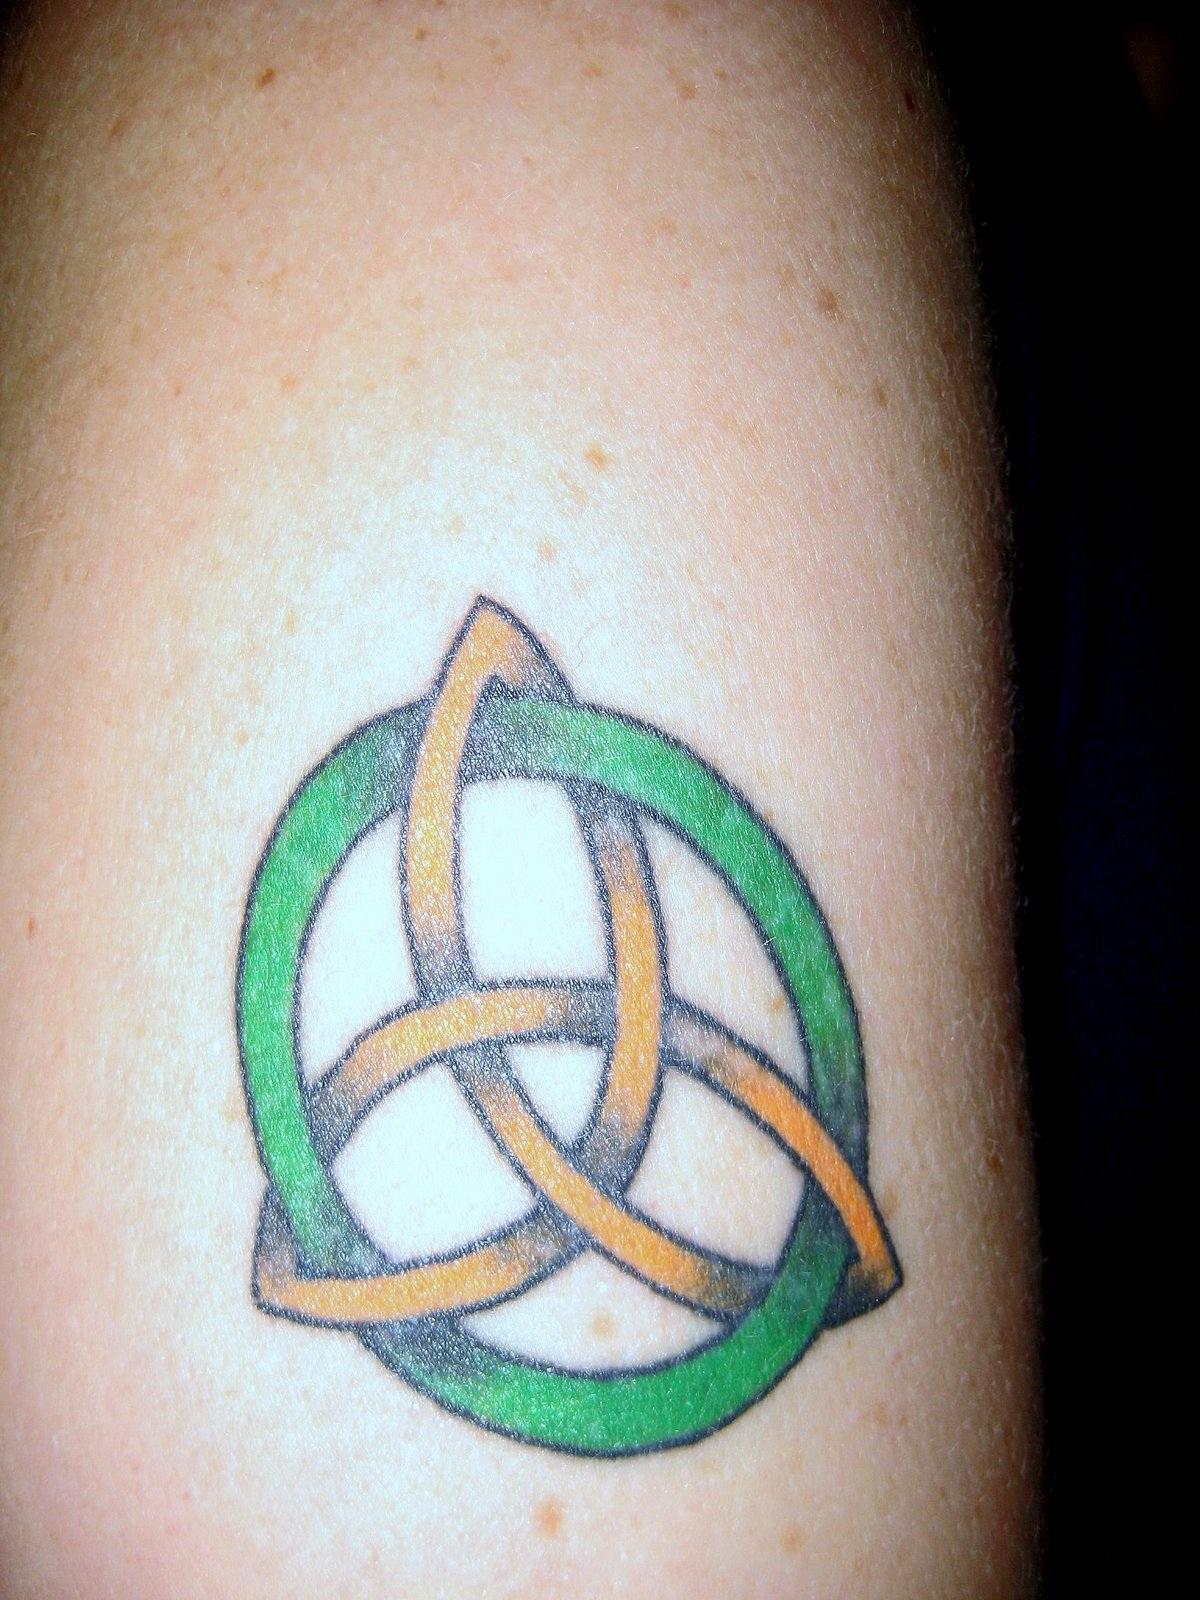 Irish Tattoos Designs, Ideas and Meaning | Tattoos For You